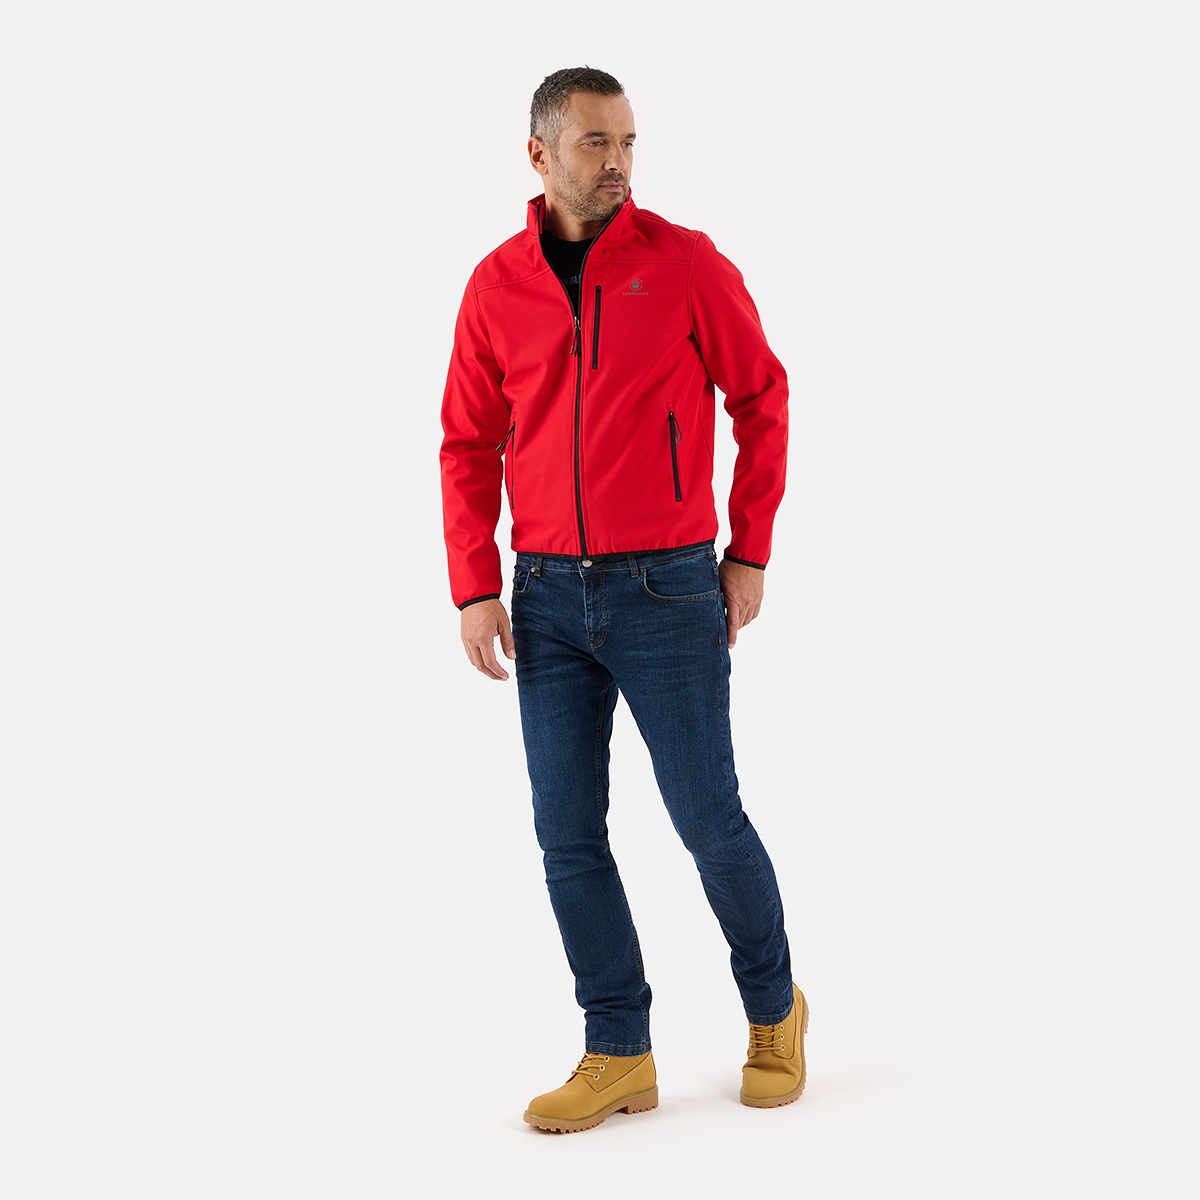 Jackets Products | Latest Trend Jackets Products | Lumberjack